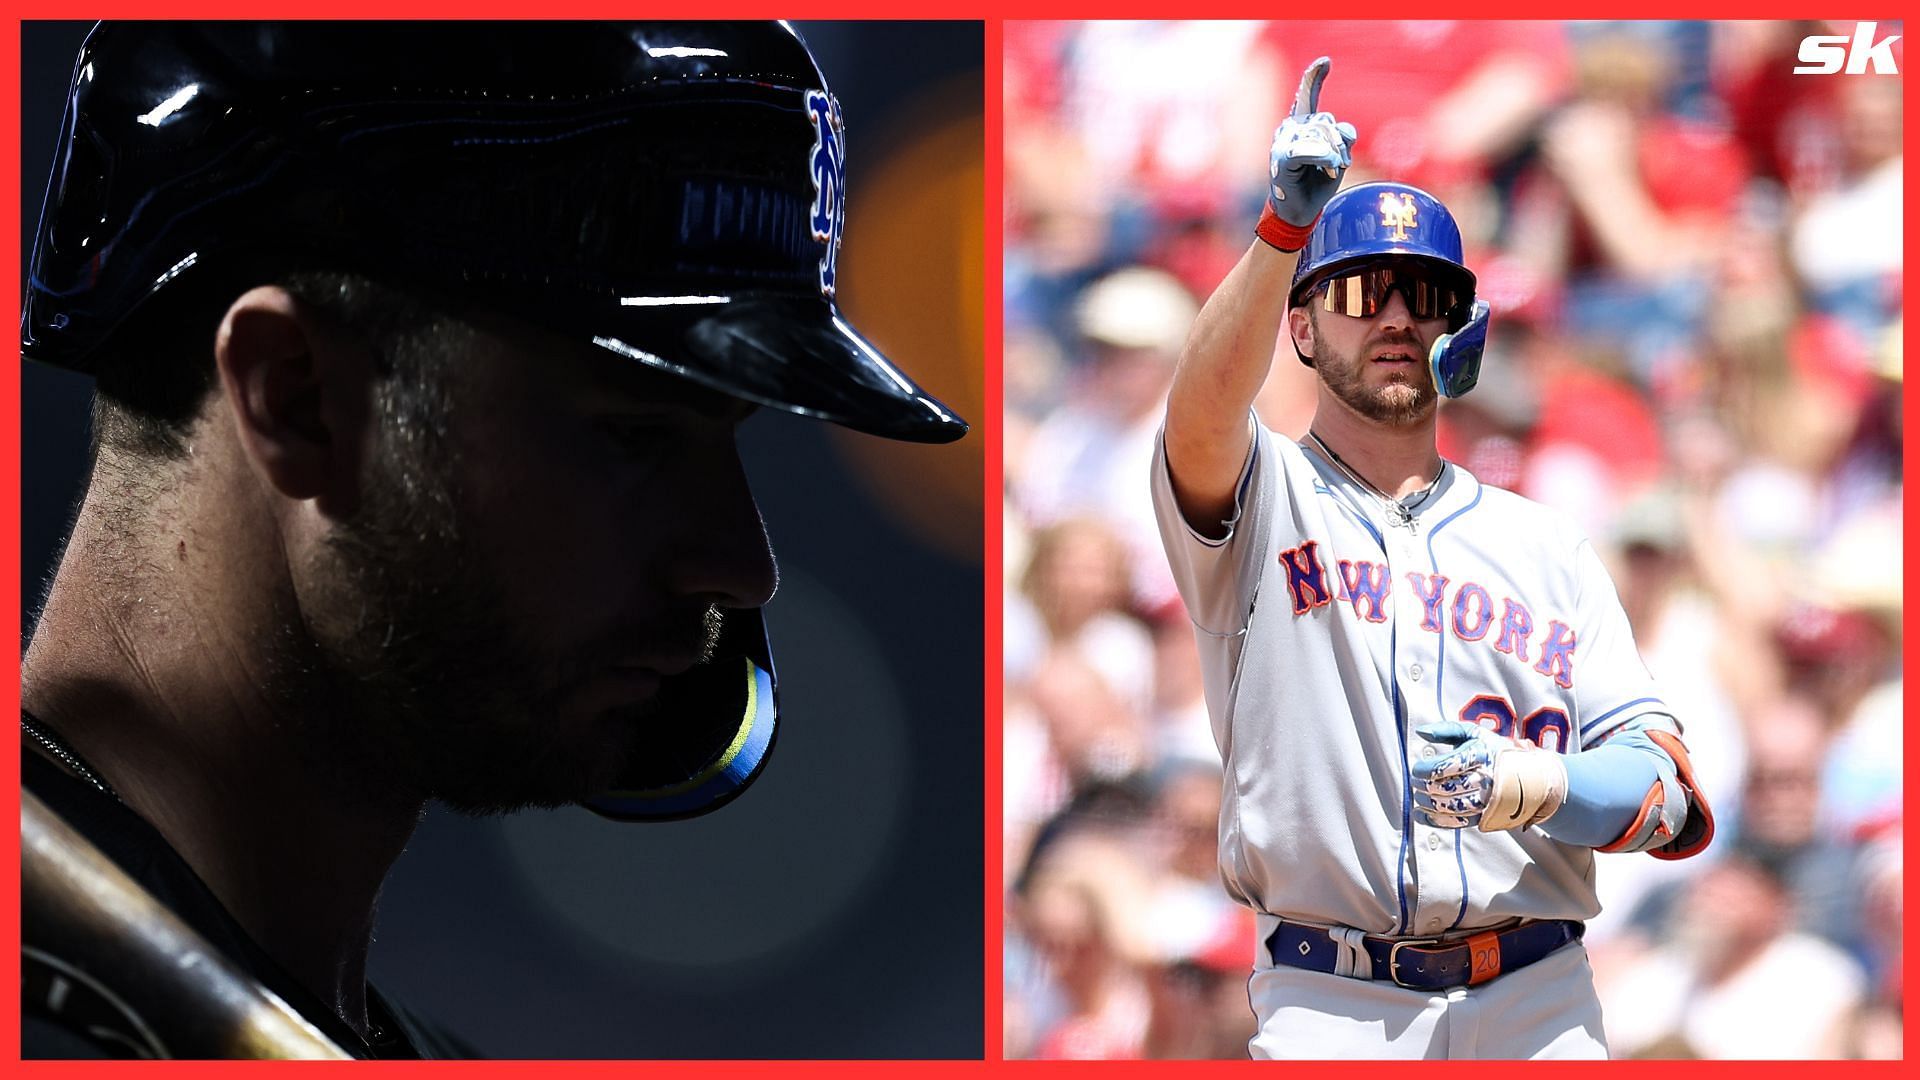 Pete Alonso frustrated with recent struggles as Mets' downfall continues: 